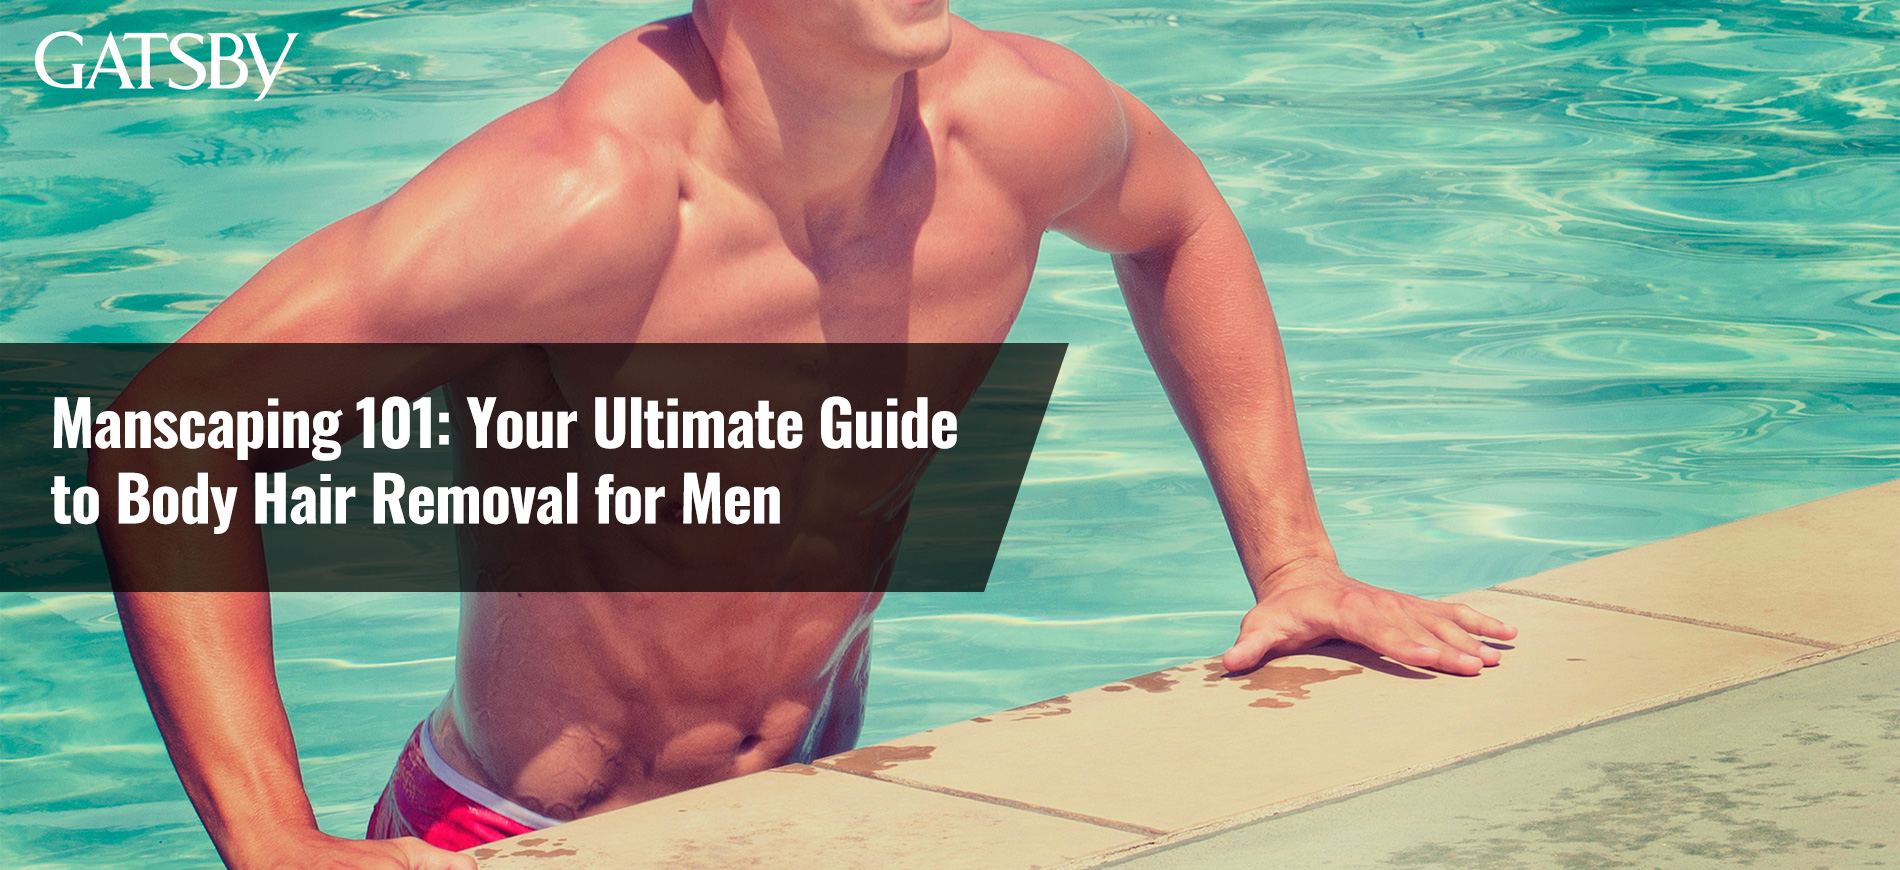 Manscaping 101: Your Ultimate Guide to Body Hair Removal for Men